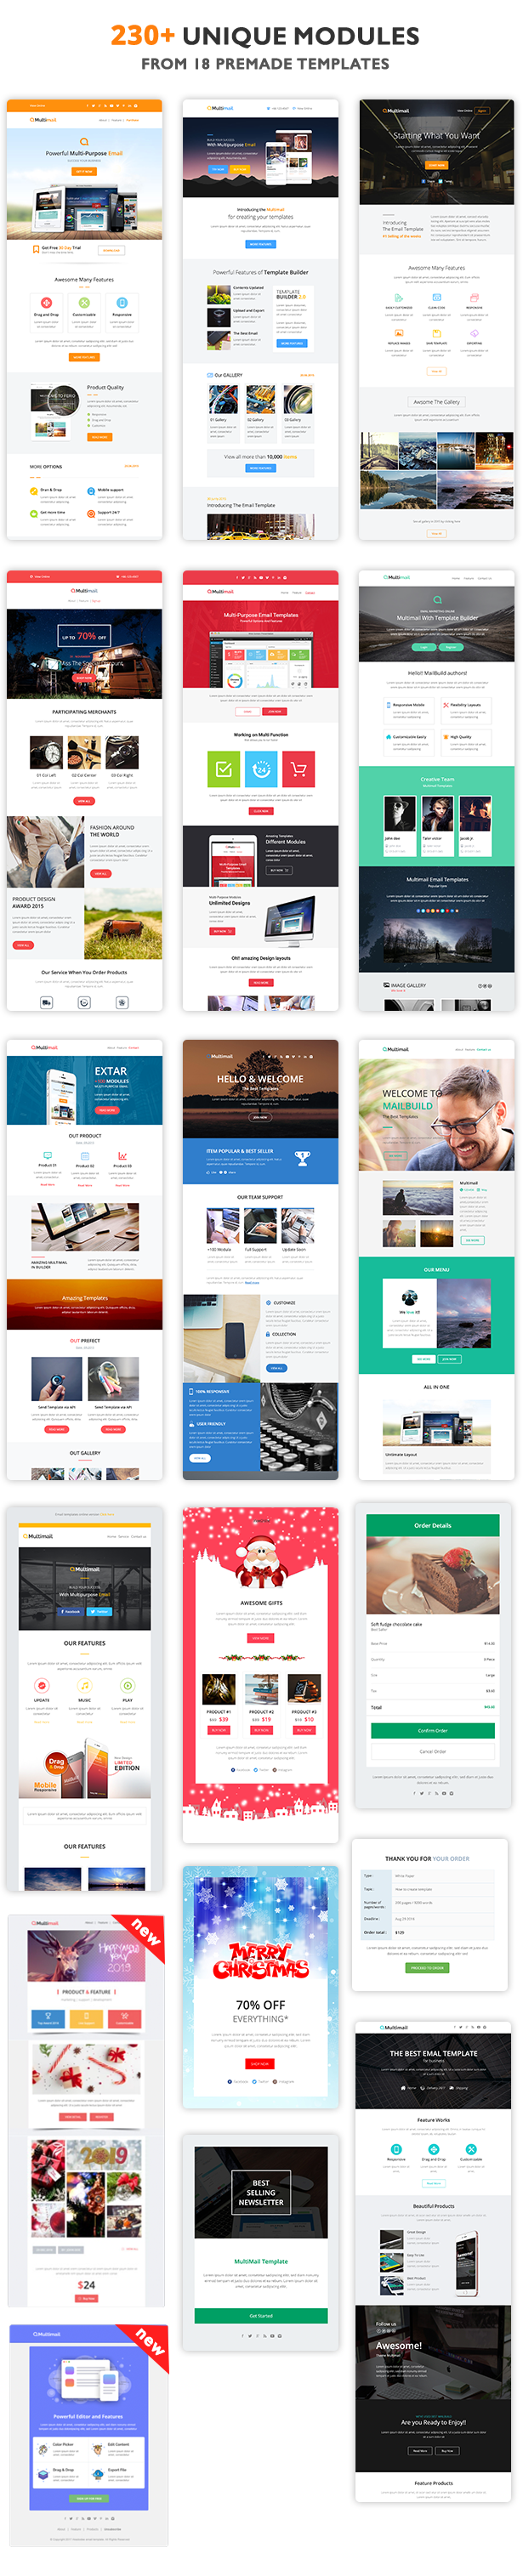 Multimail | Responsive Email Template Set + Builder Online - 4